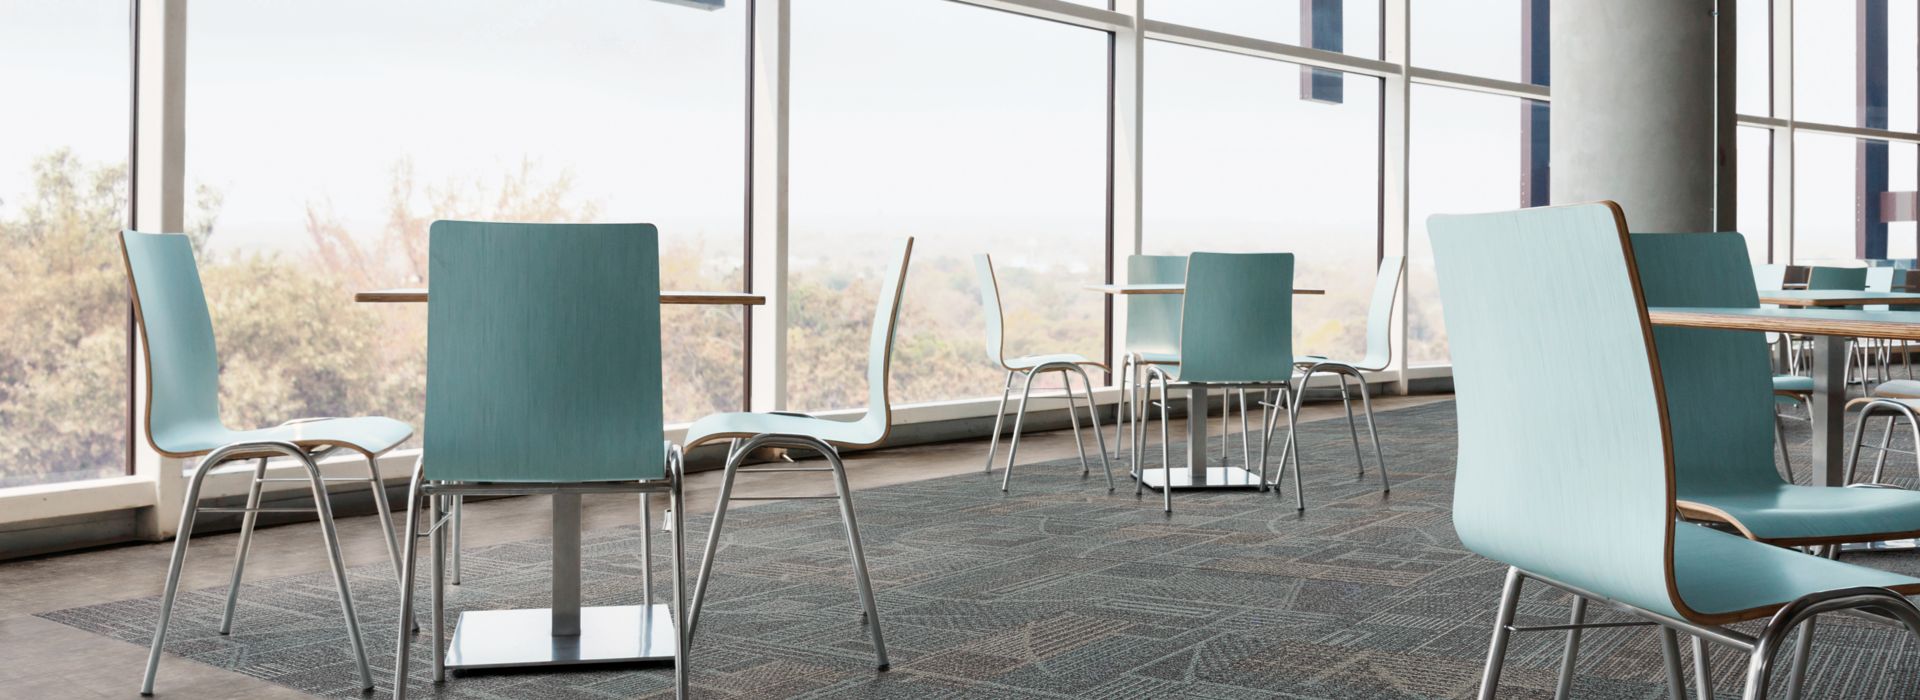 Interface Layout carpet tile and Textured Stones LVT in cafe area with teal colored chairs and natural light